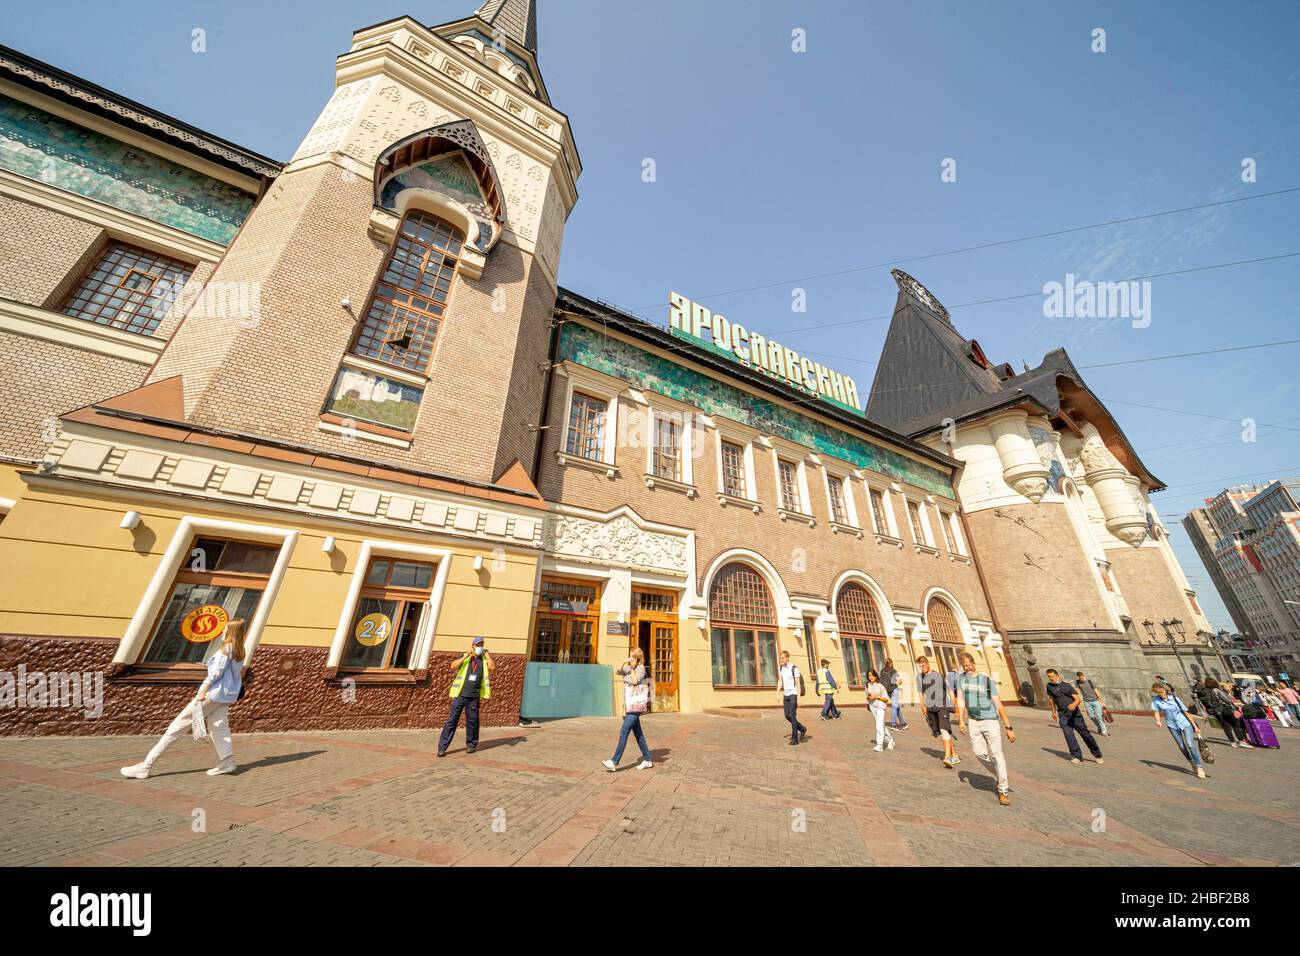 Art Nouveau architecture in Moscow- Jaroslavsky Vokzal Trainstation building, redisigned by architect M Lewestam in 1902, Russia Stock Photo